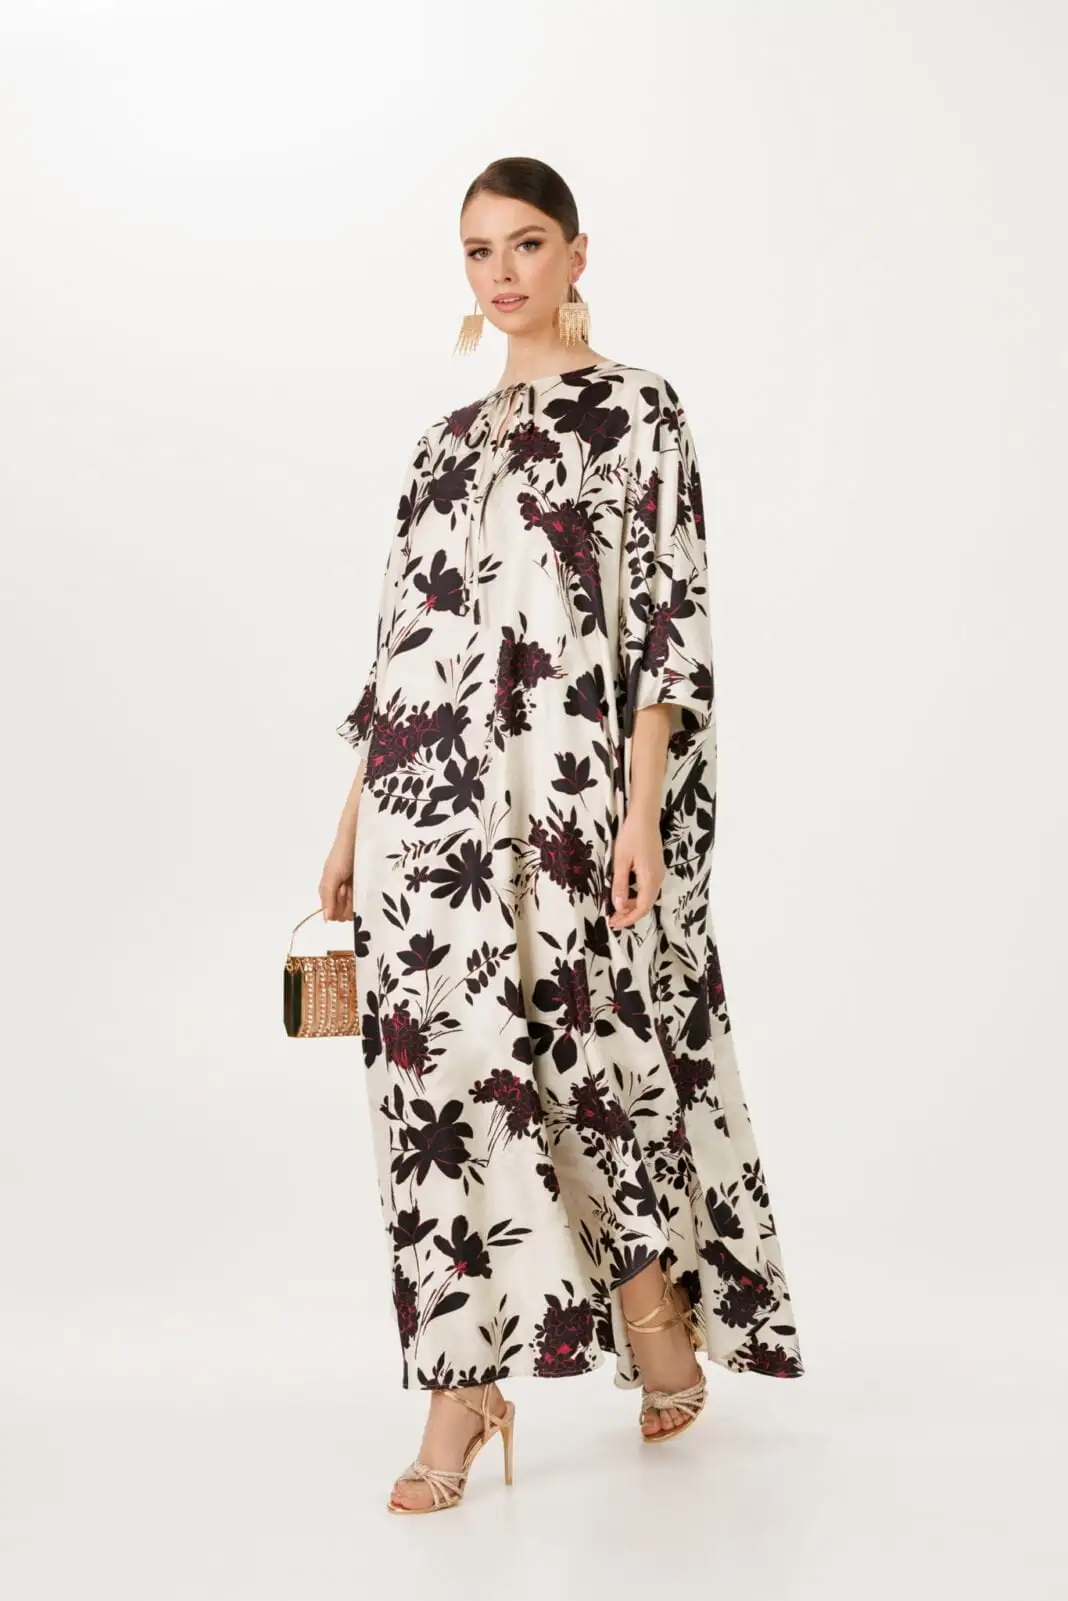 Luxury designer ethically made floral caftan dress for women by house of azoiia